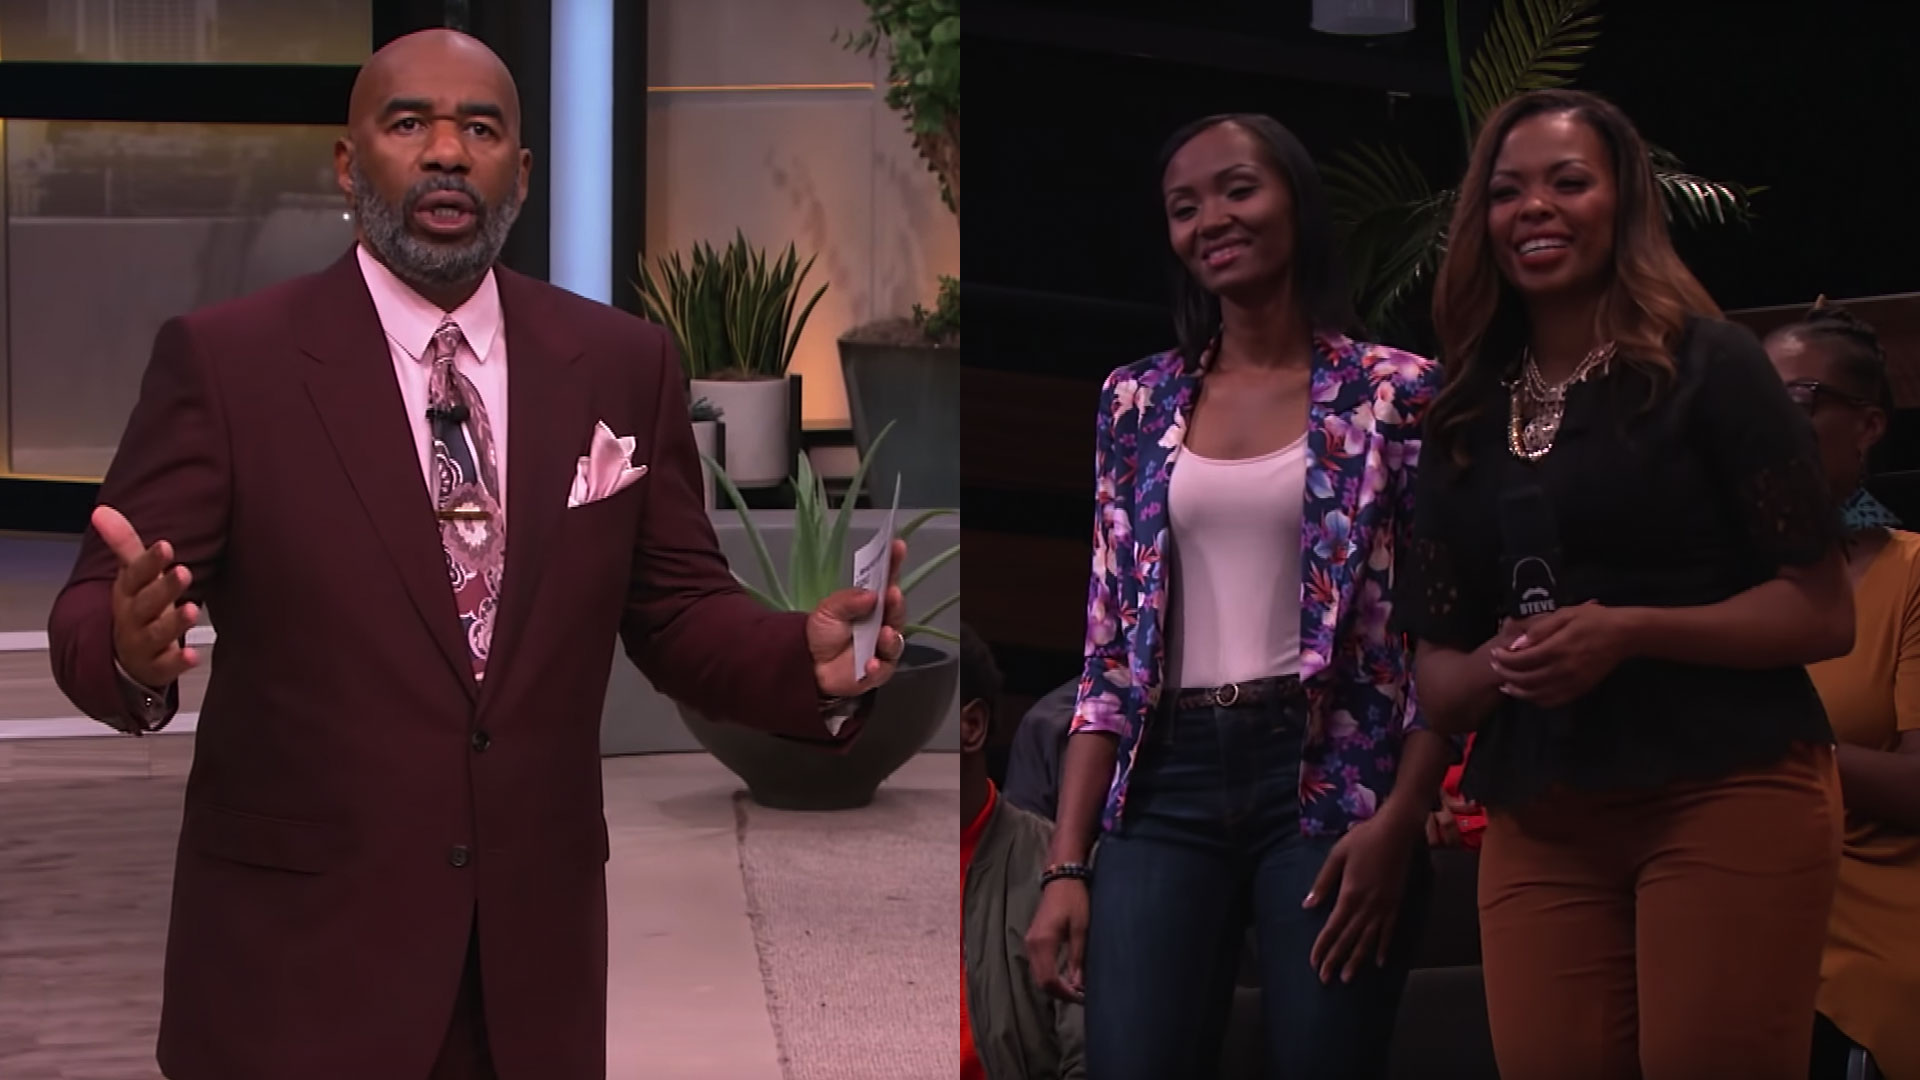 Steve Harvey gives advice to a young, single, Christian mother on how best to find a Godly man outside of her church